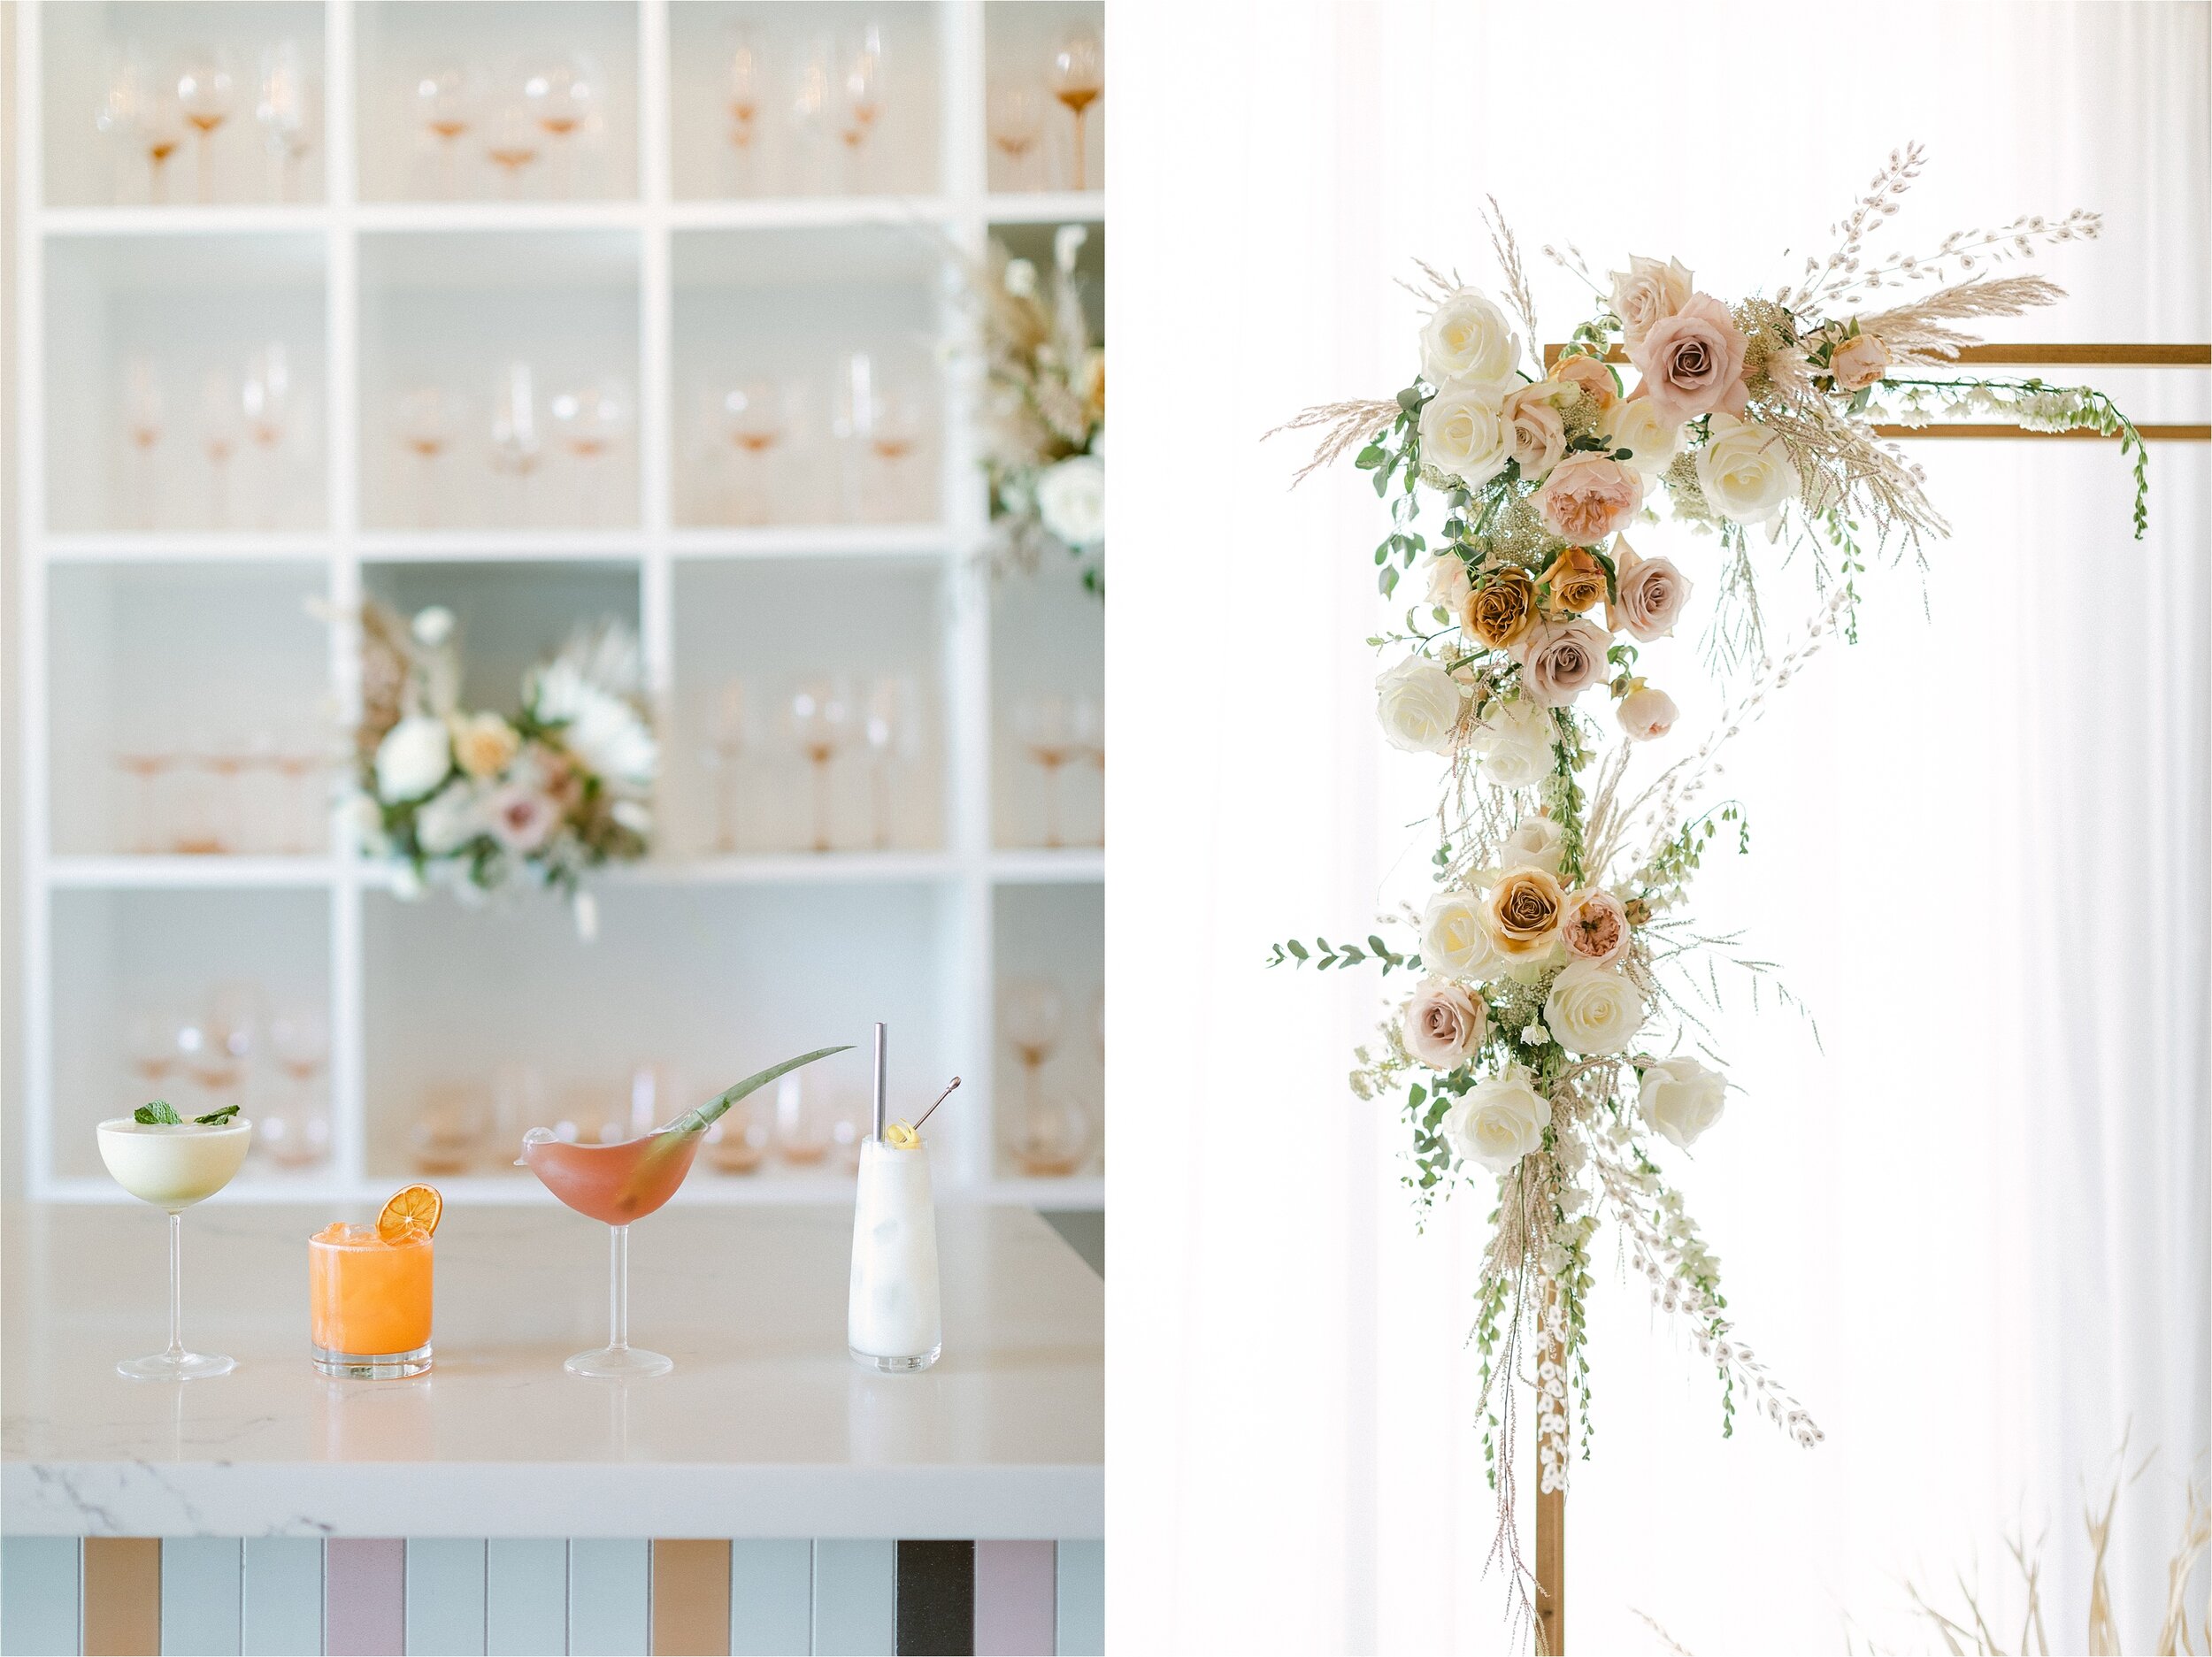 4 signature cocktails in various specialty glasses and a angular ceremony arch with neutral flowers hanging on the corner